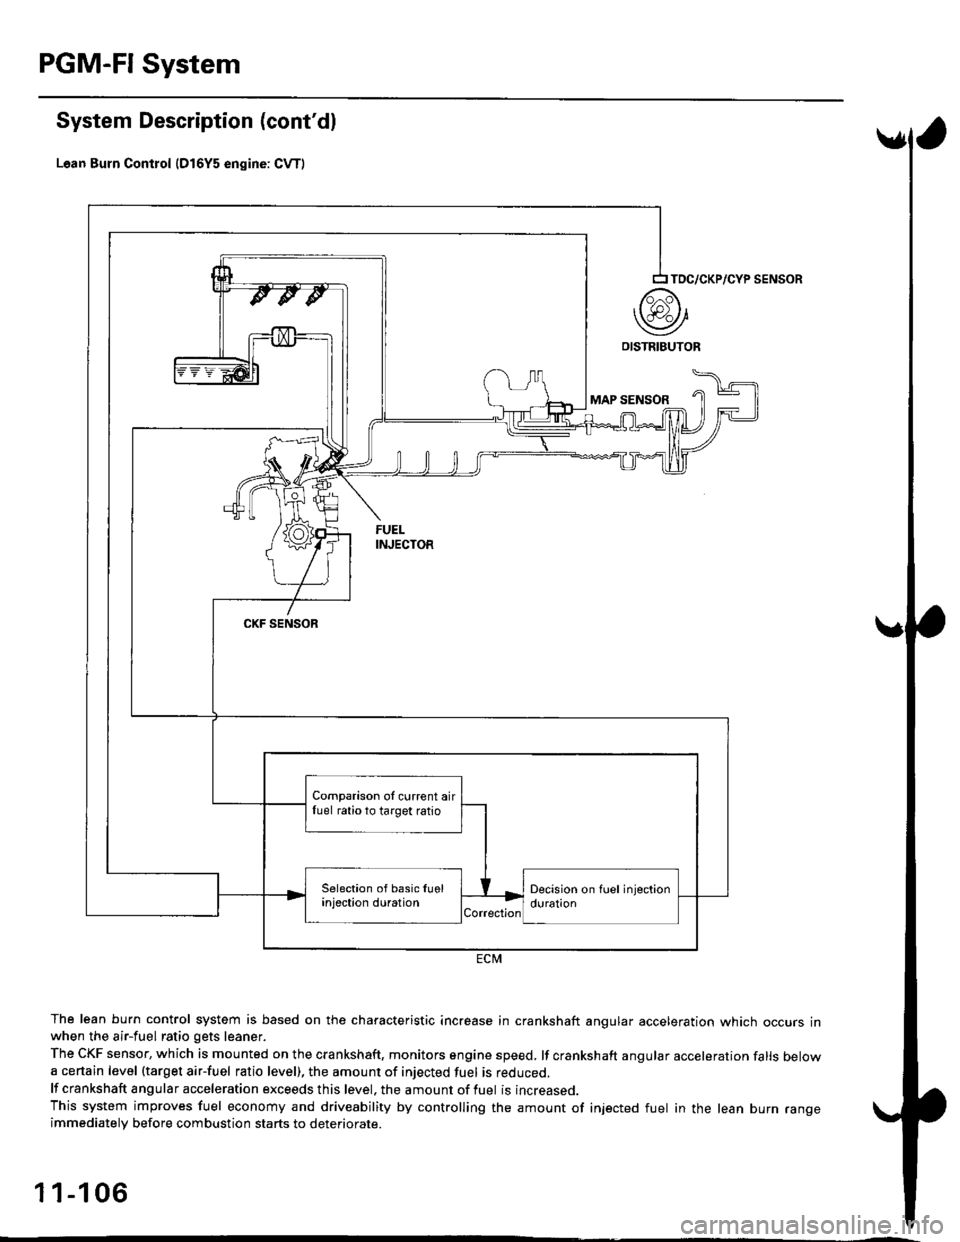 HONDA CIVIC 1996 6.G Owners Manual PGM-FI System
System Description (contdl
Lean Burn Control {D16Y5 engine: CvT)
The lean burn control system is based on the characteristic increase in crankshaft angular acceleration which occurs inw